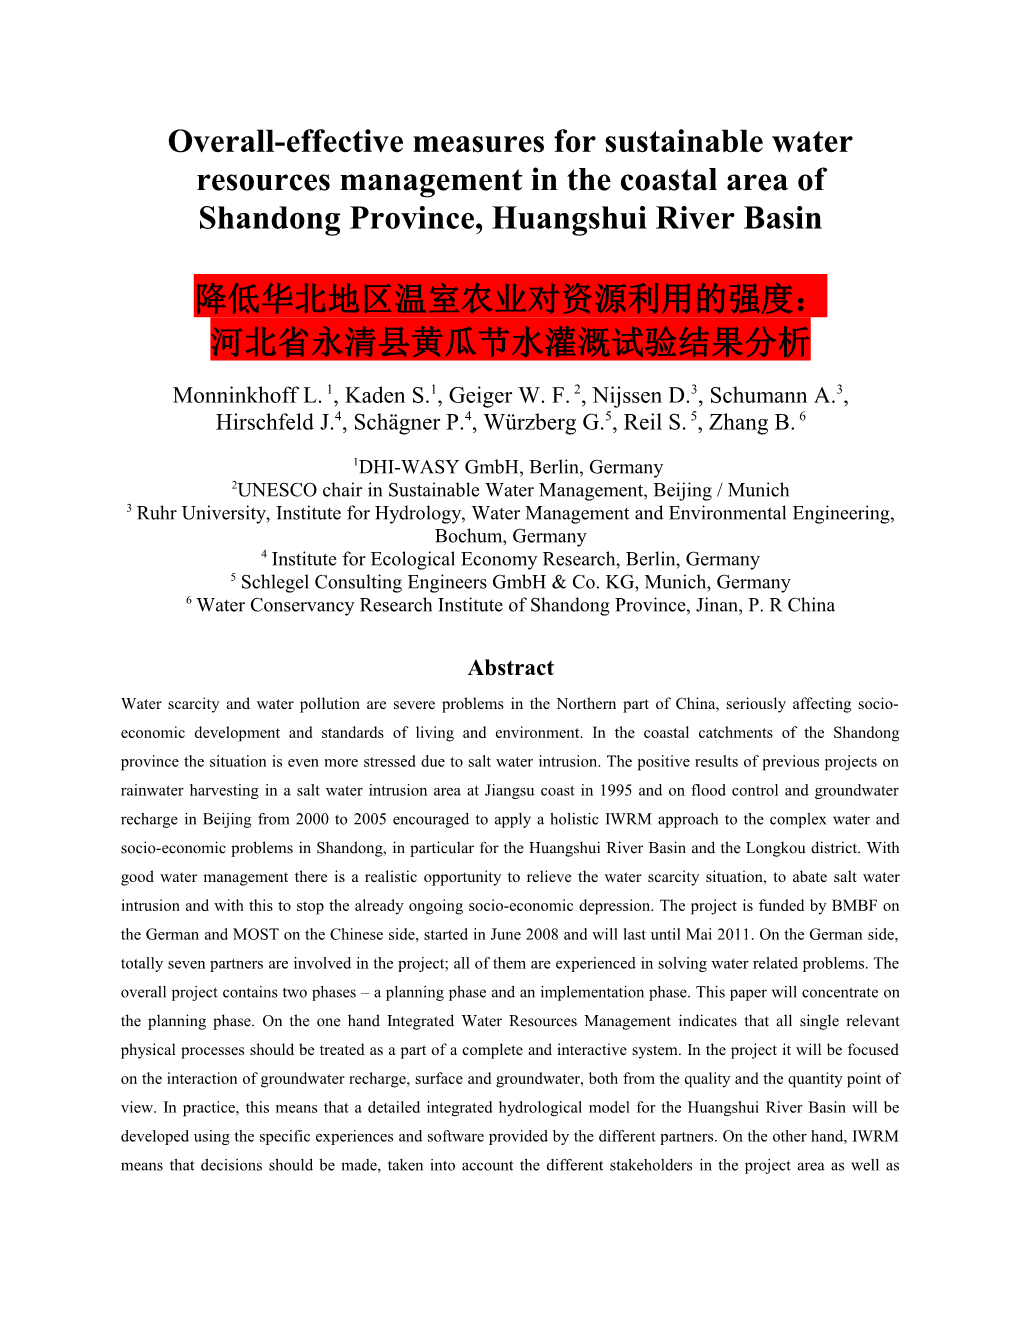 Overall-Effective Measures for Sustainable Water Resources Management in the Coastal Area